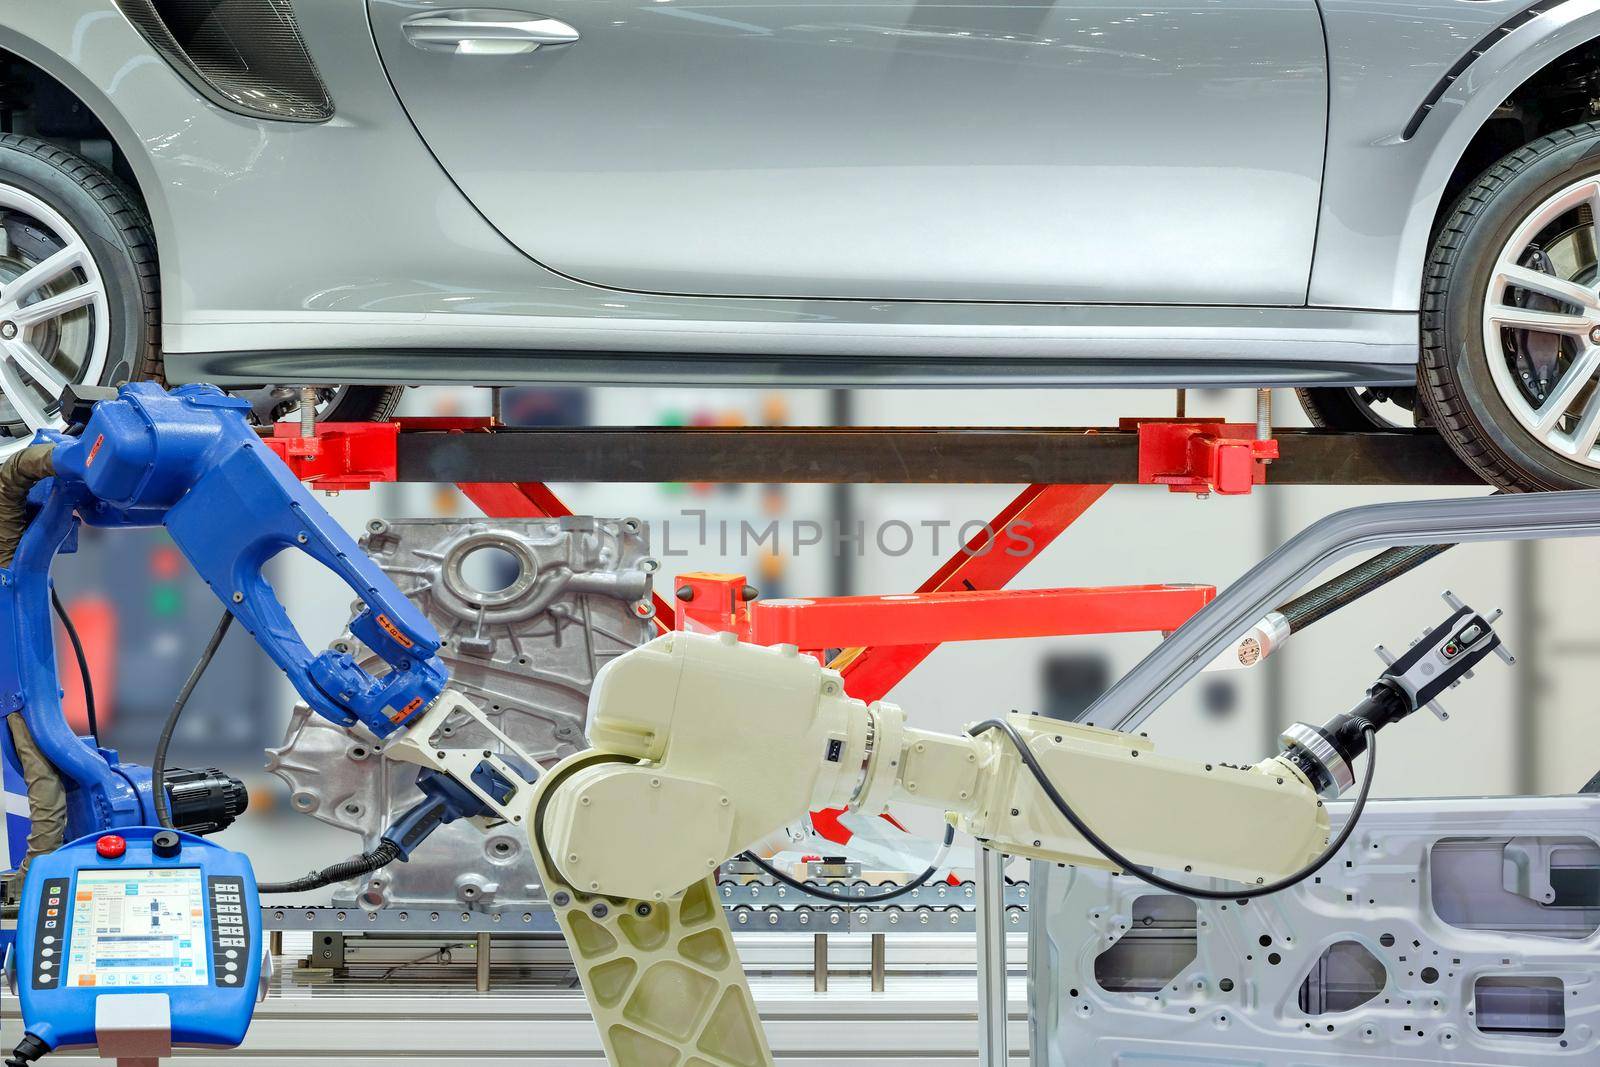 Industrial robotic installed 3D scan device to scanning auto parts for measuring data with remote for setting program for work automation on blurred control panel background, industry 4.0 concept